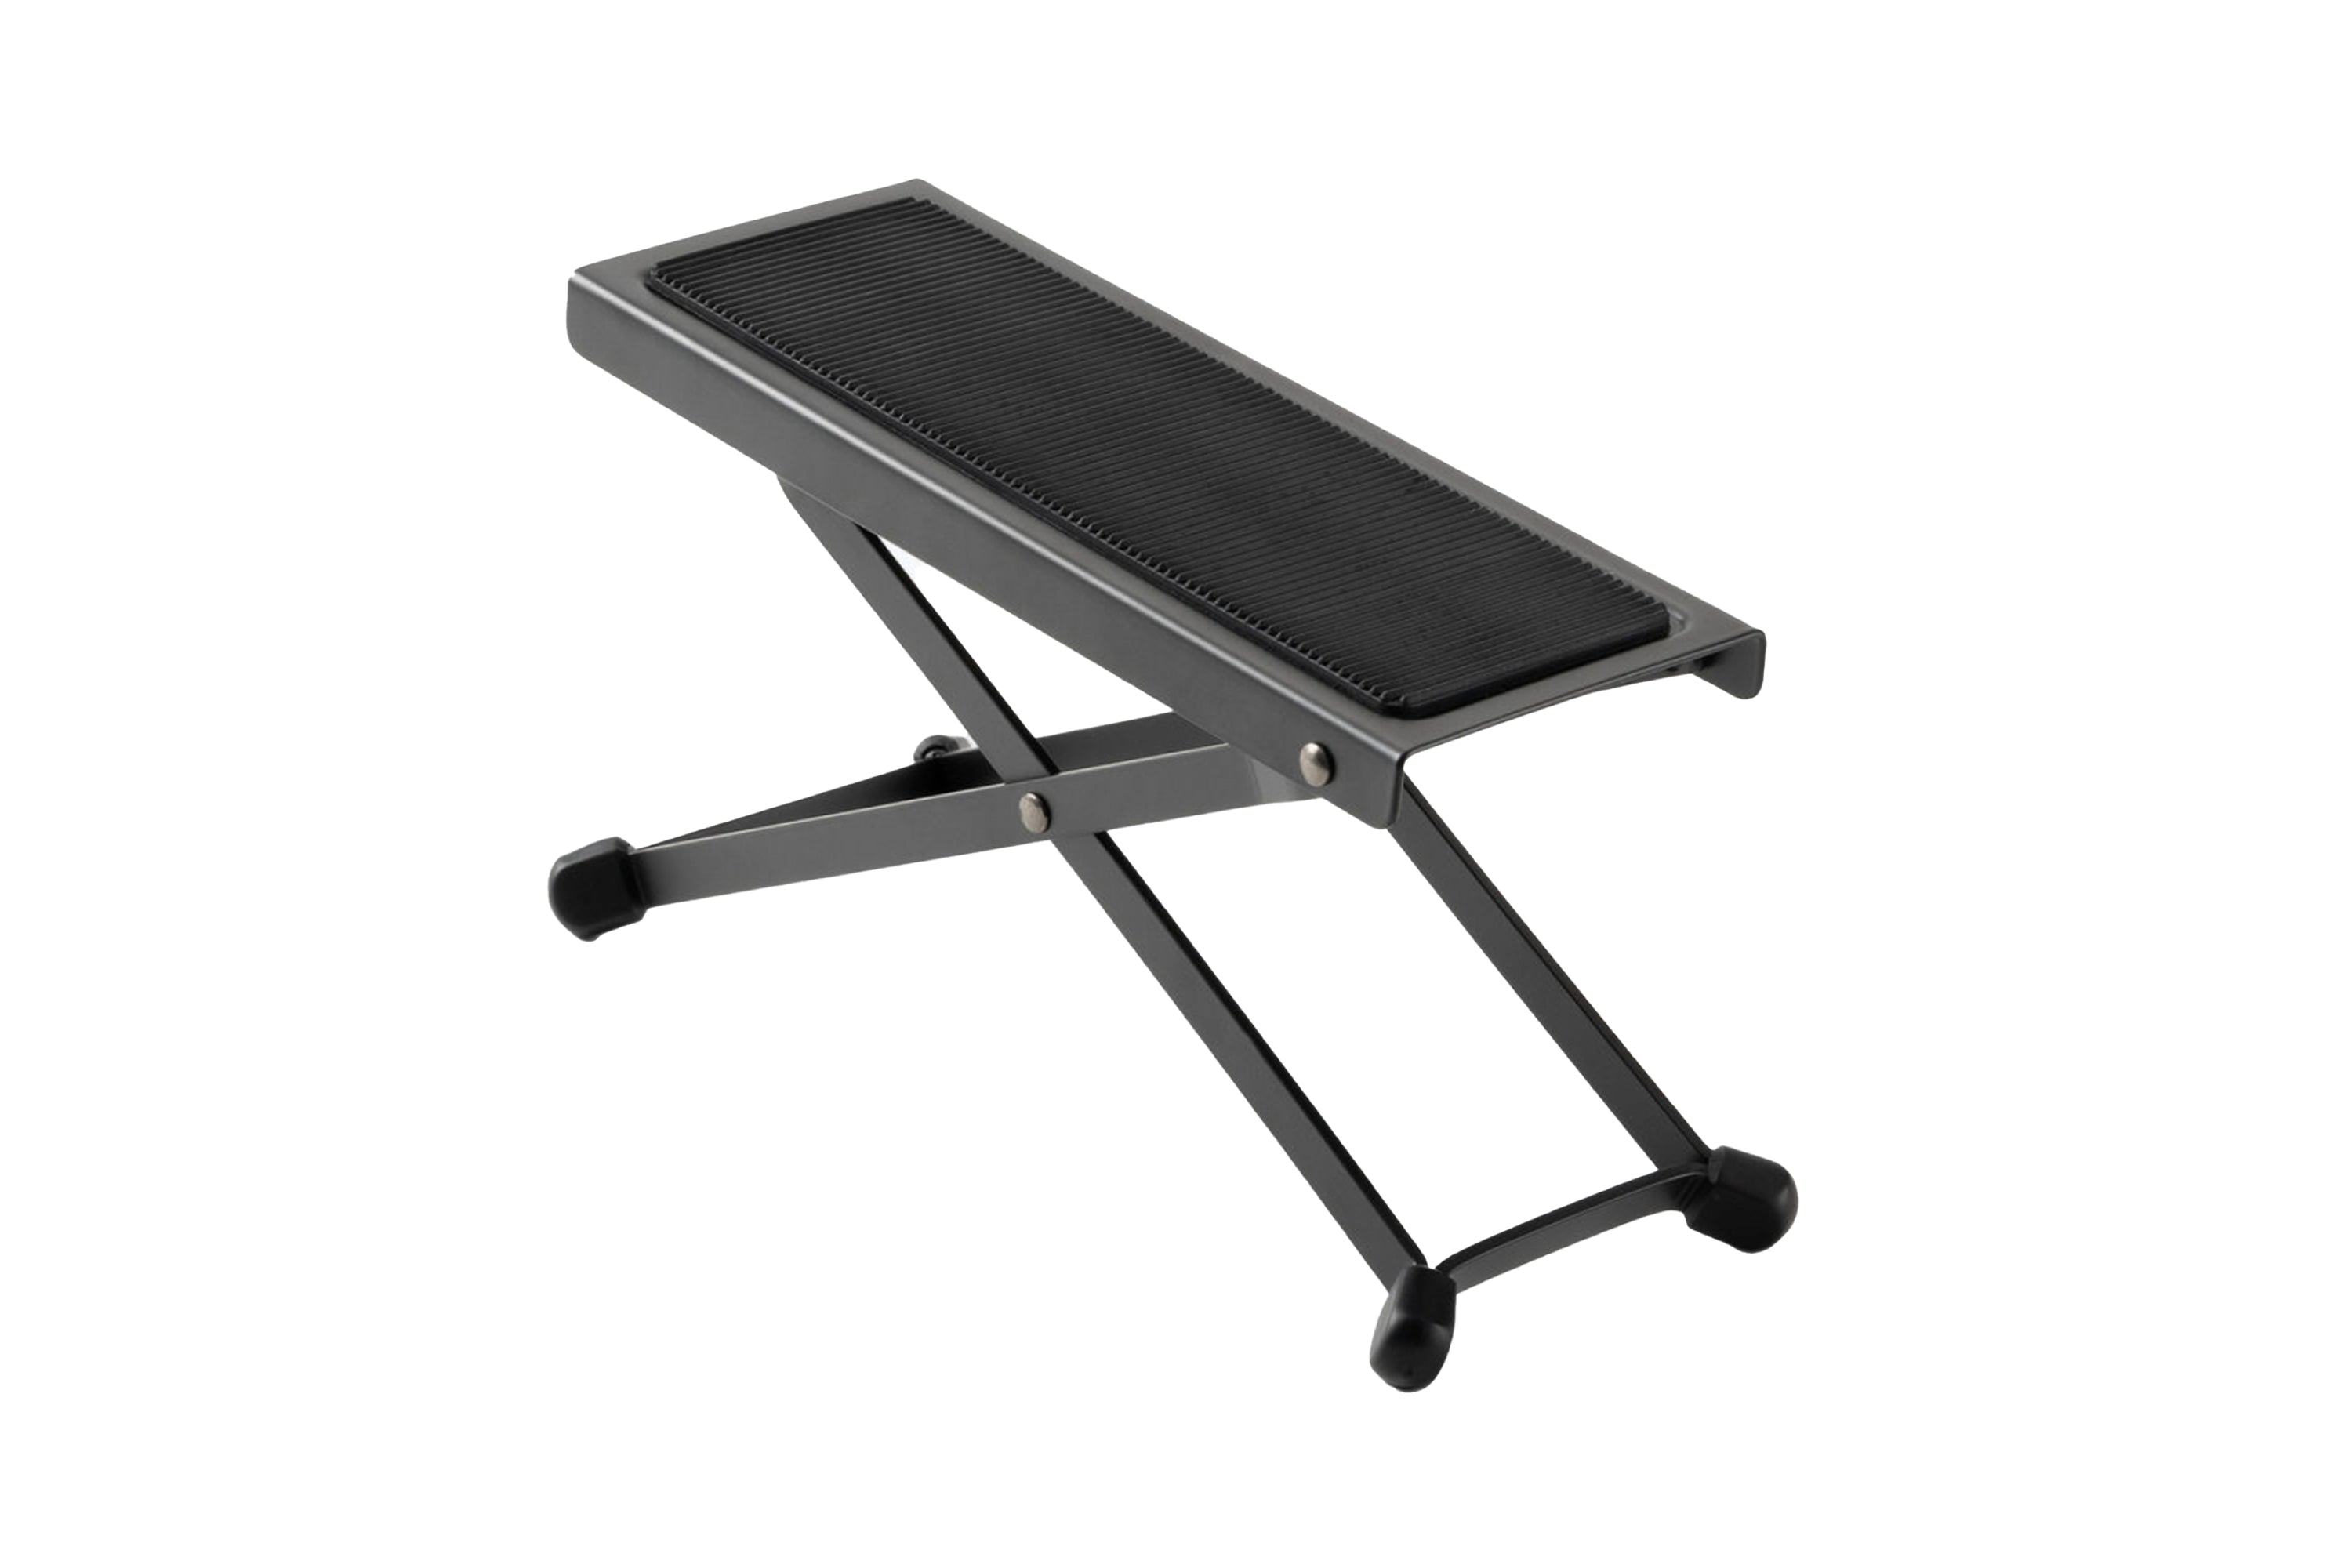 On-Stage FS7850B Foot Stool